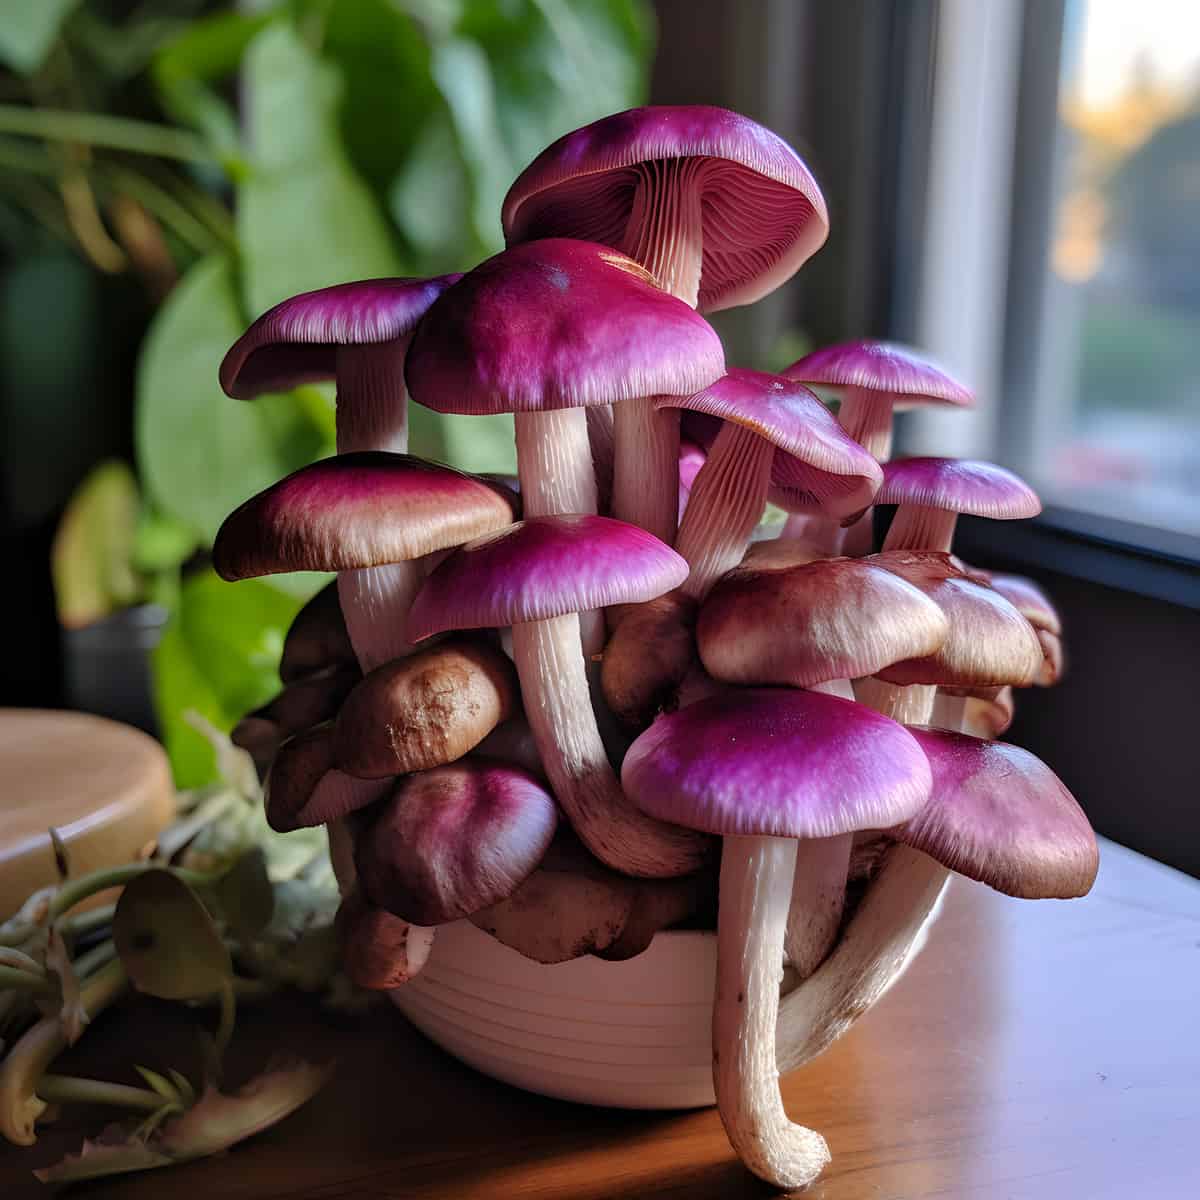 Blewit on a kitchen counter